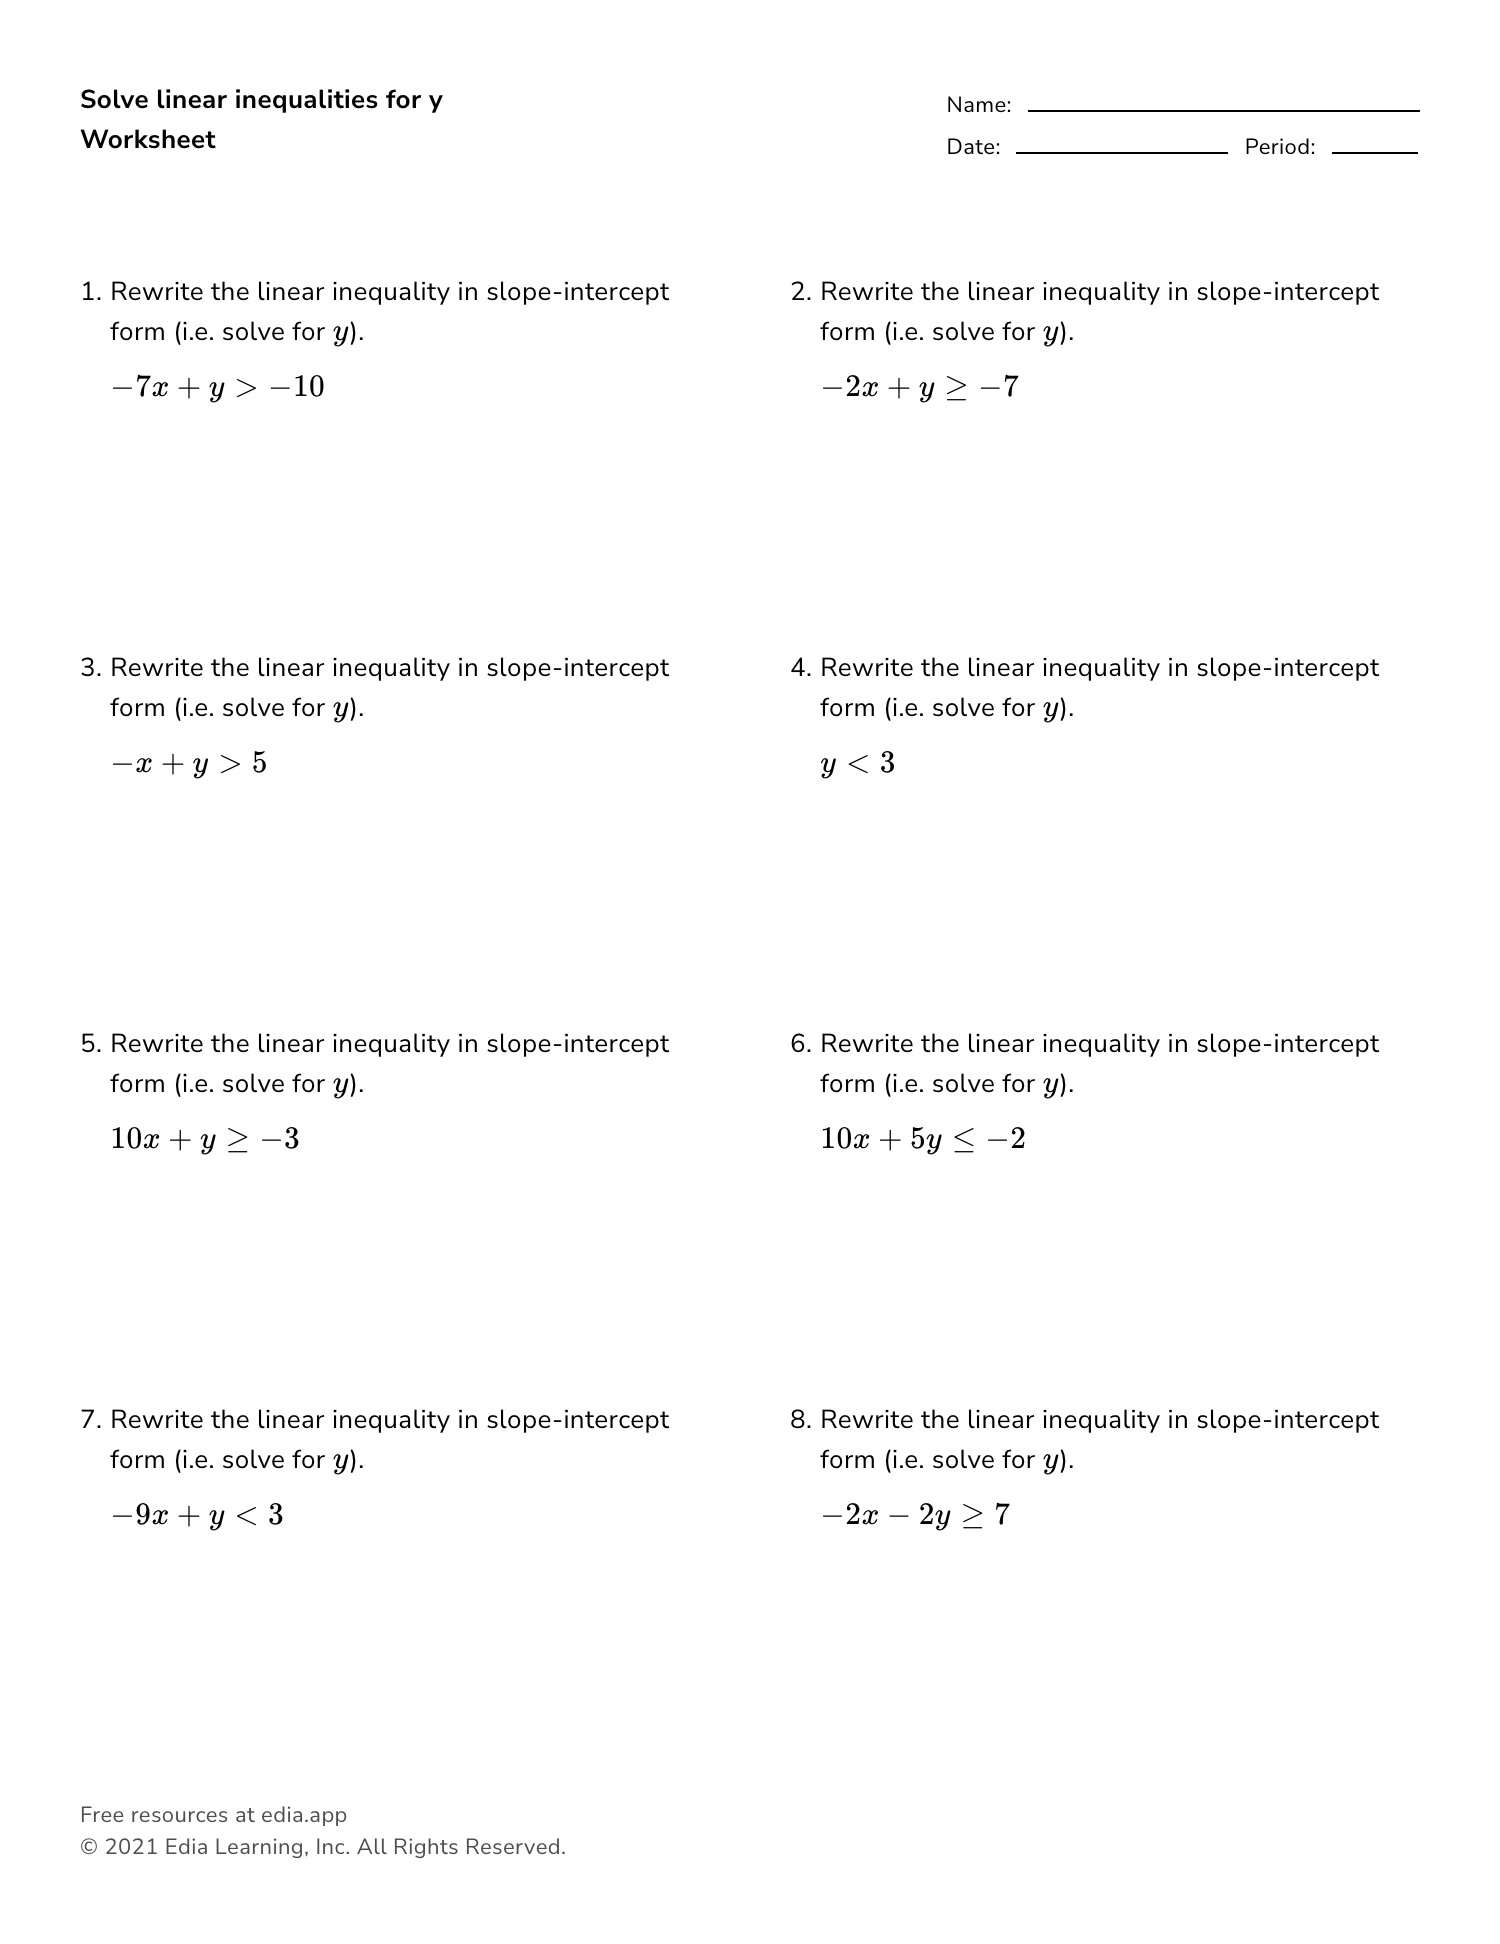 Solve Linear Inequalities For Y - Worksheet For Solving Linear Inequalities Worksheet